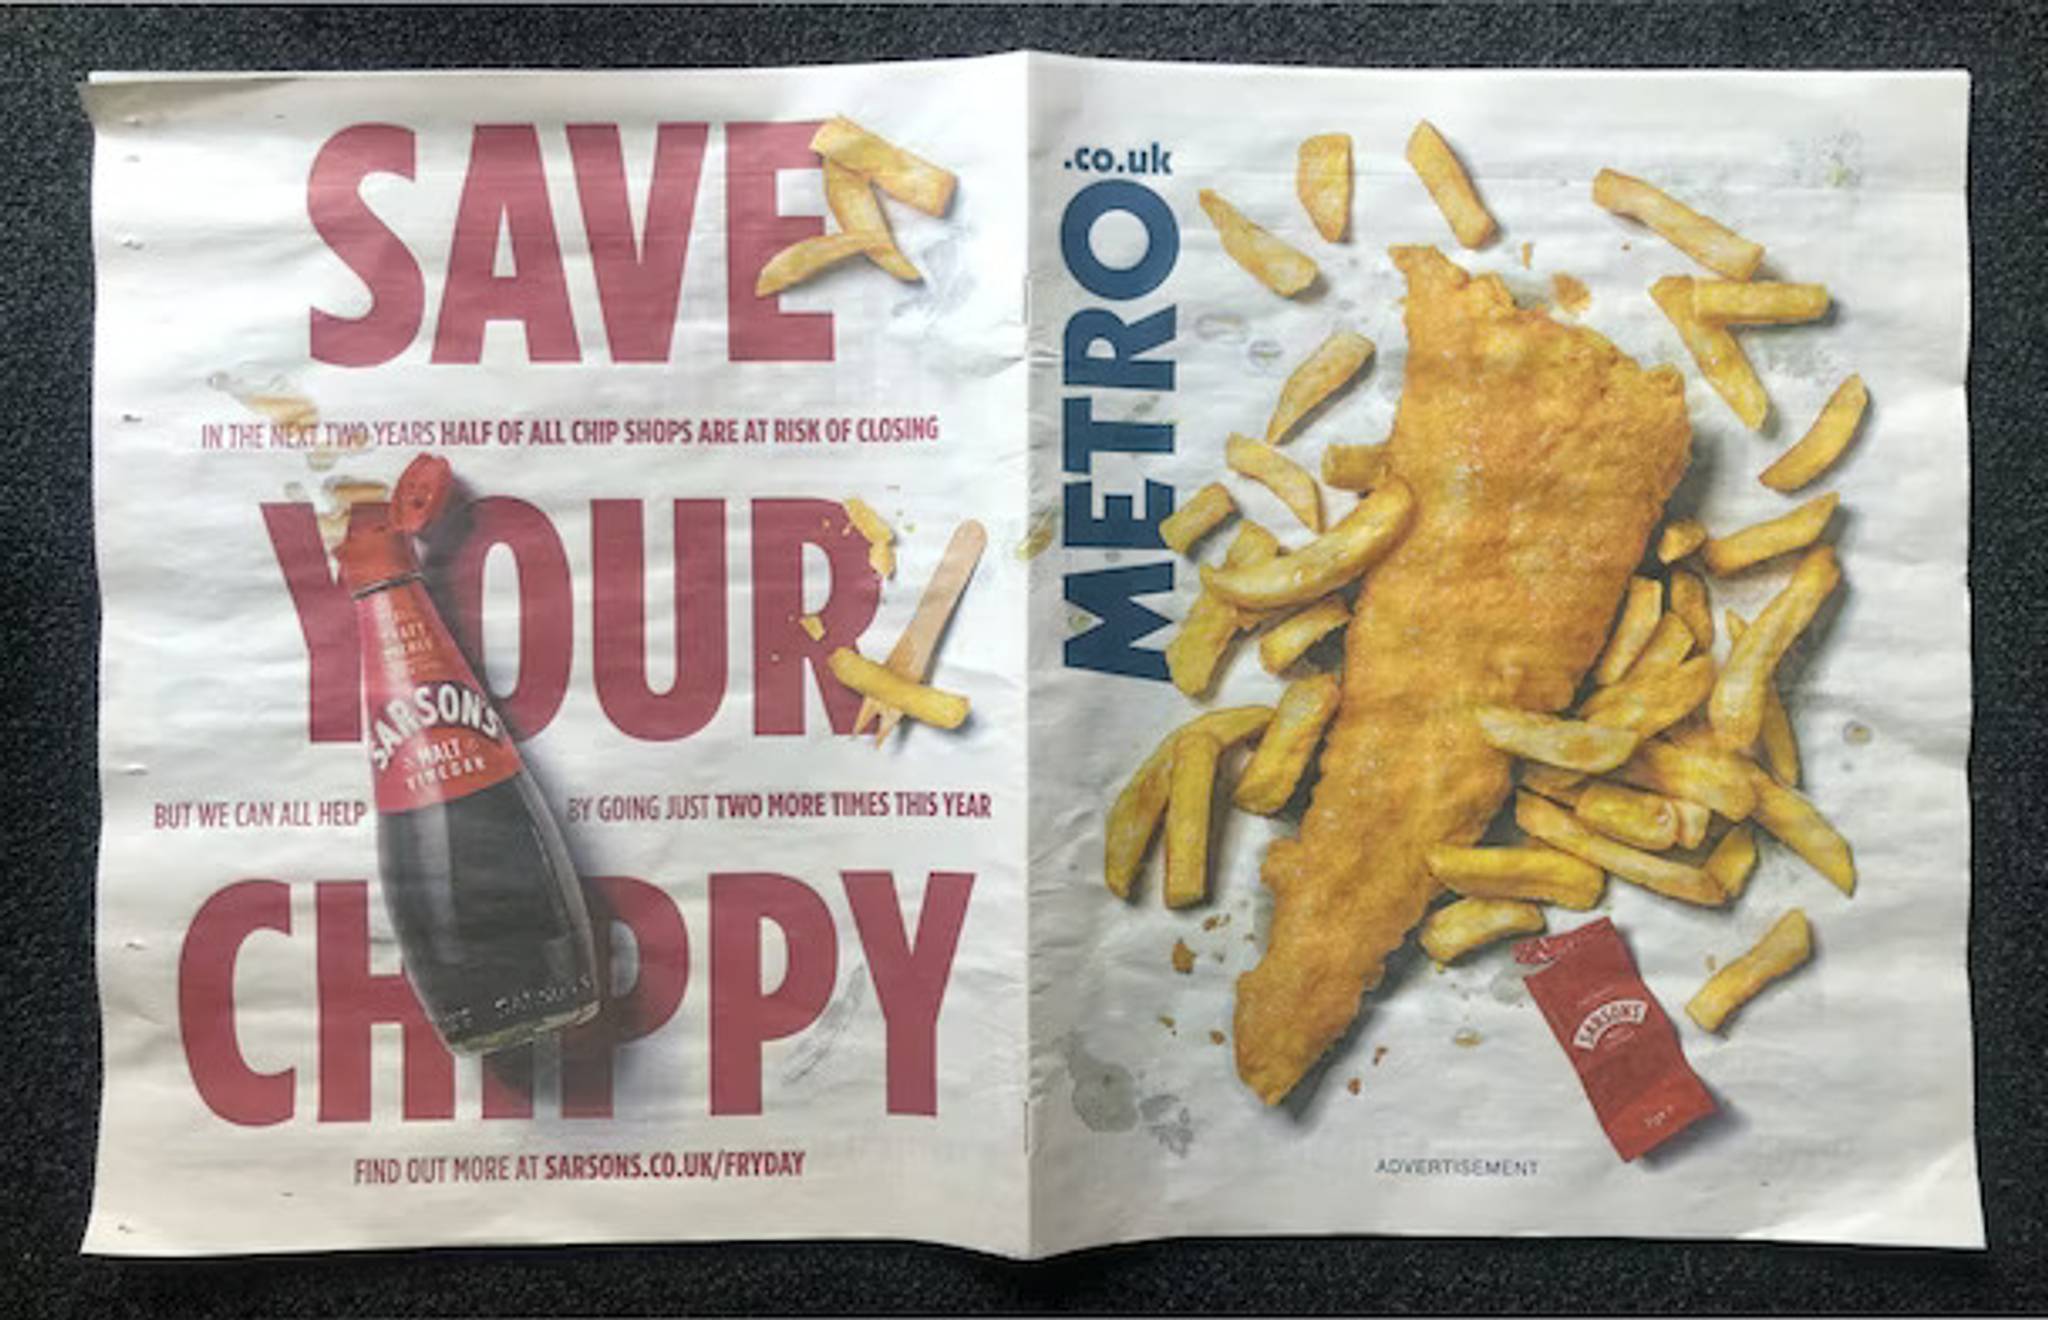 'Fryday' campaign looks to save British chippies